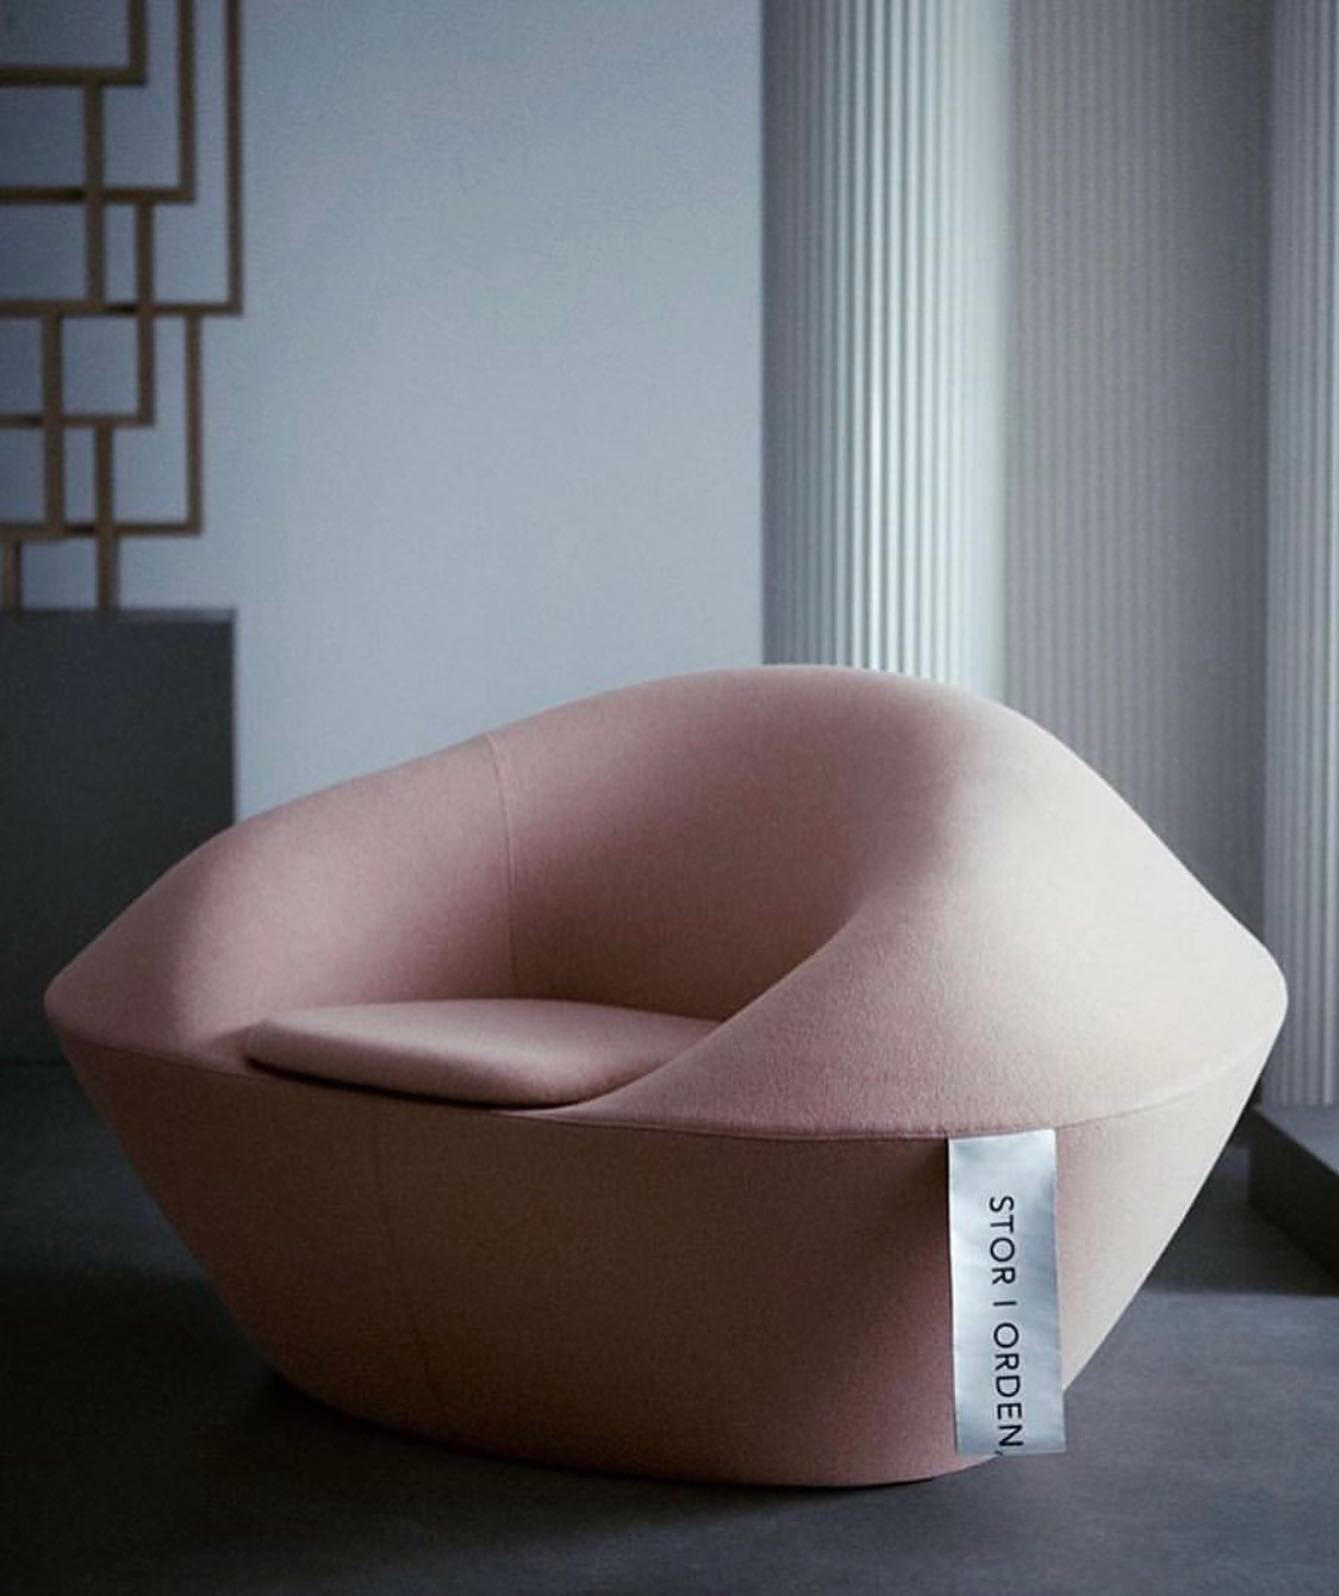 Product.Only - Fortuna by Hanna Stenström and Jennie Adén⁣•⁣•⁣•#Product_Only #architecture #decor #f